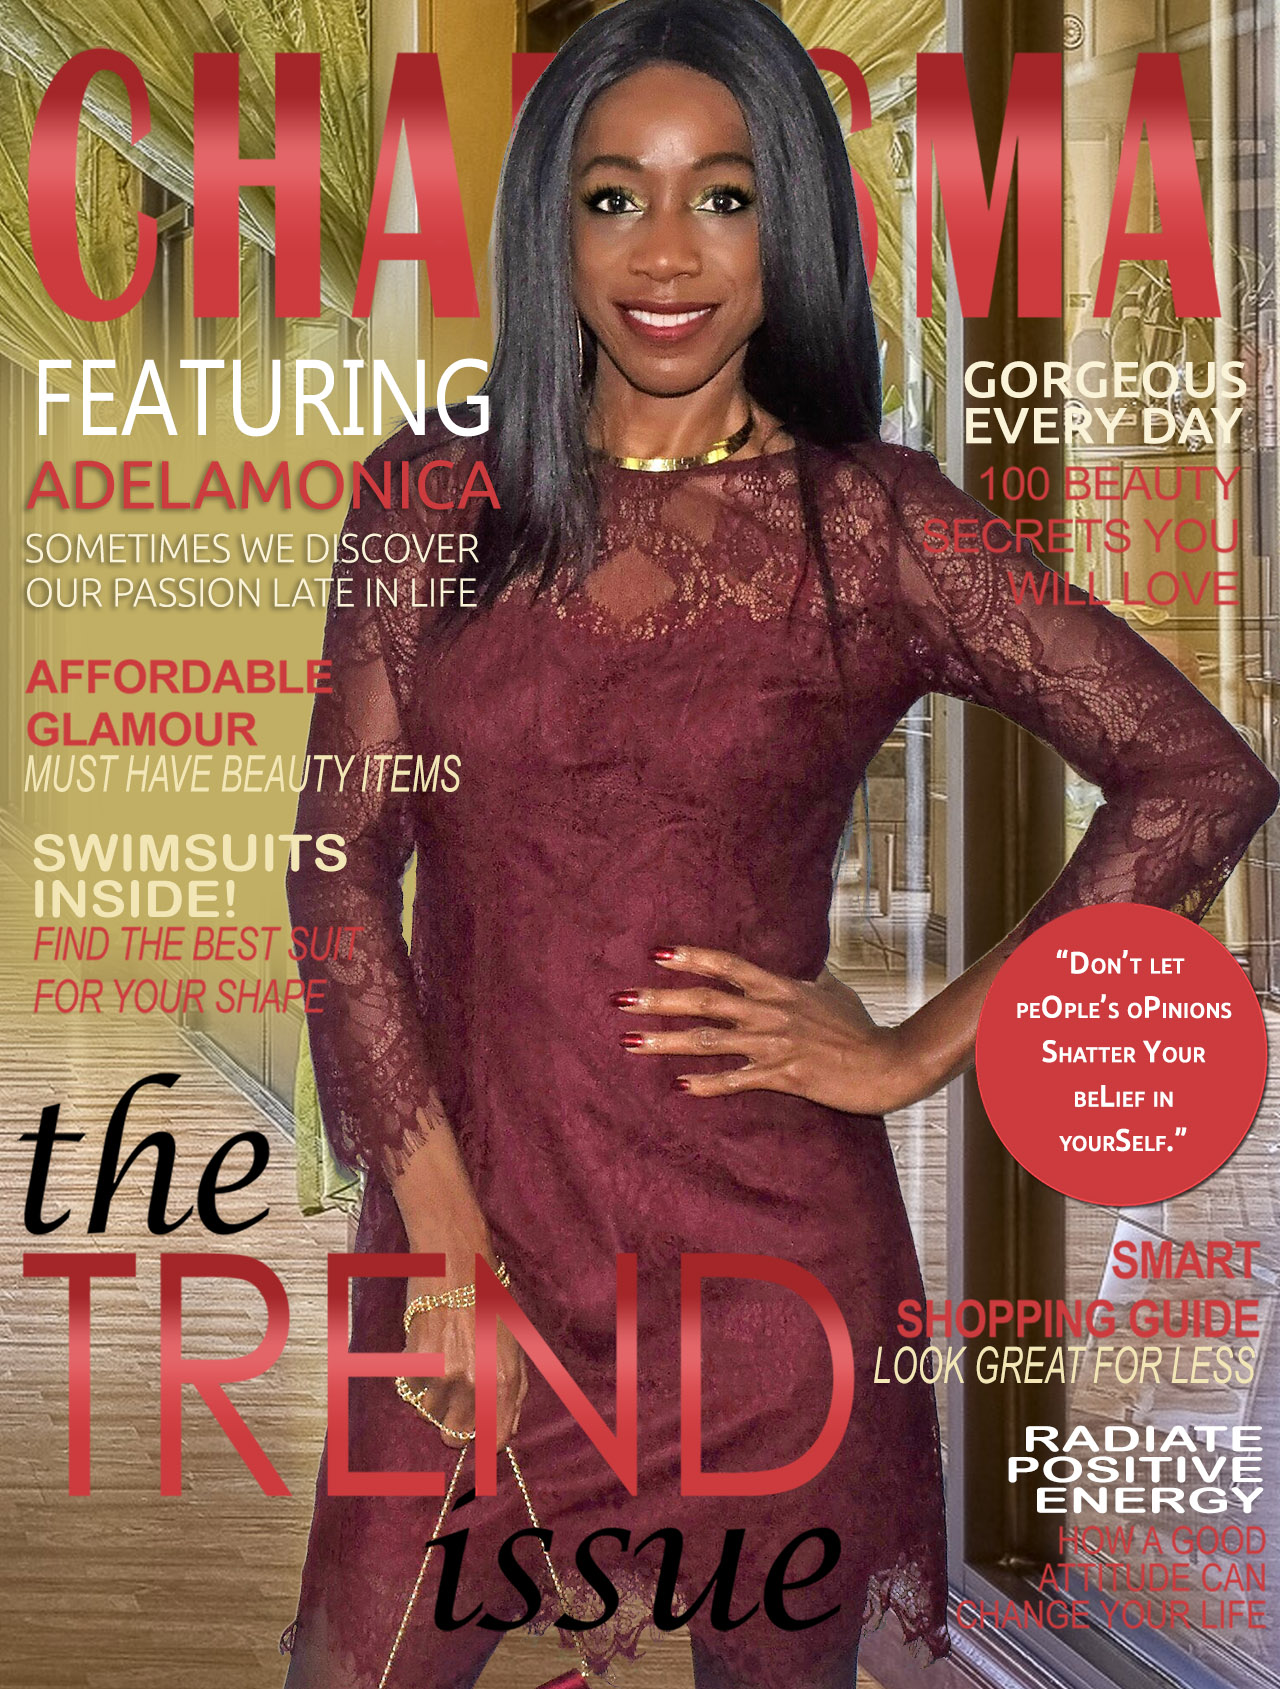 monica in the burgundy dress on fake magazine cover